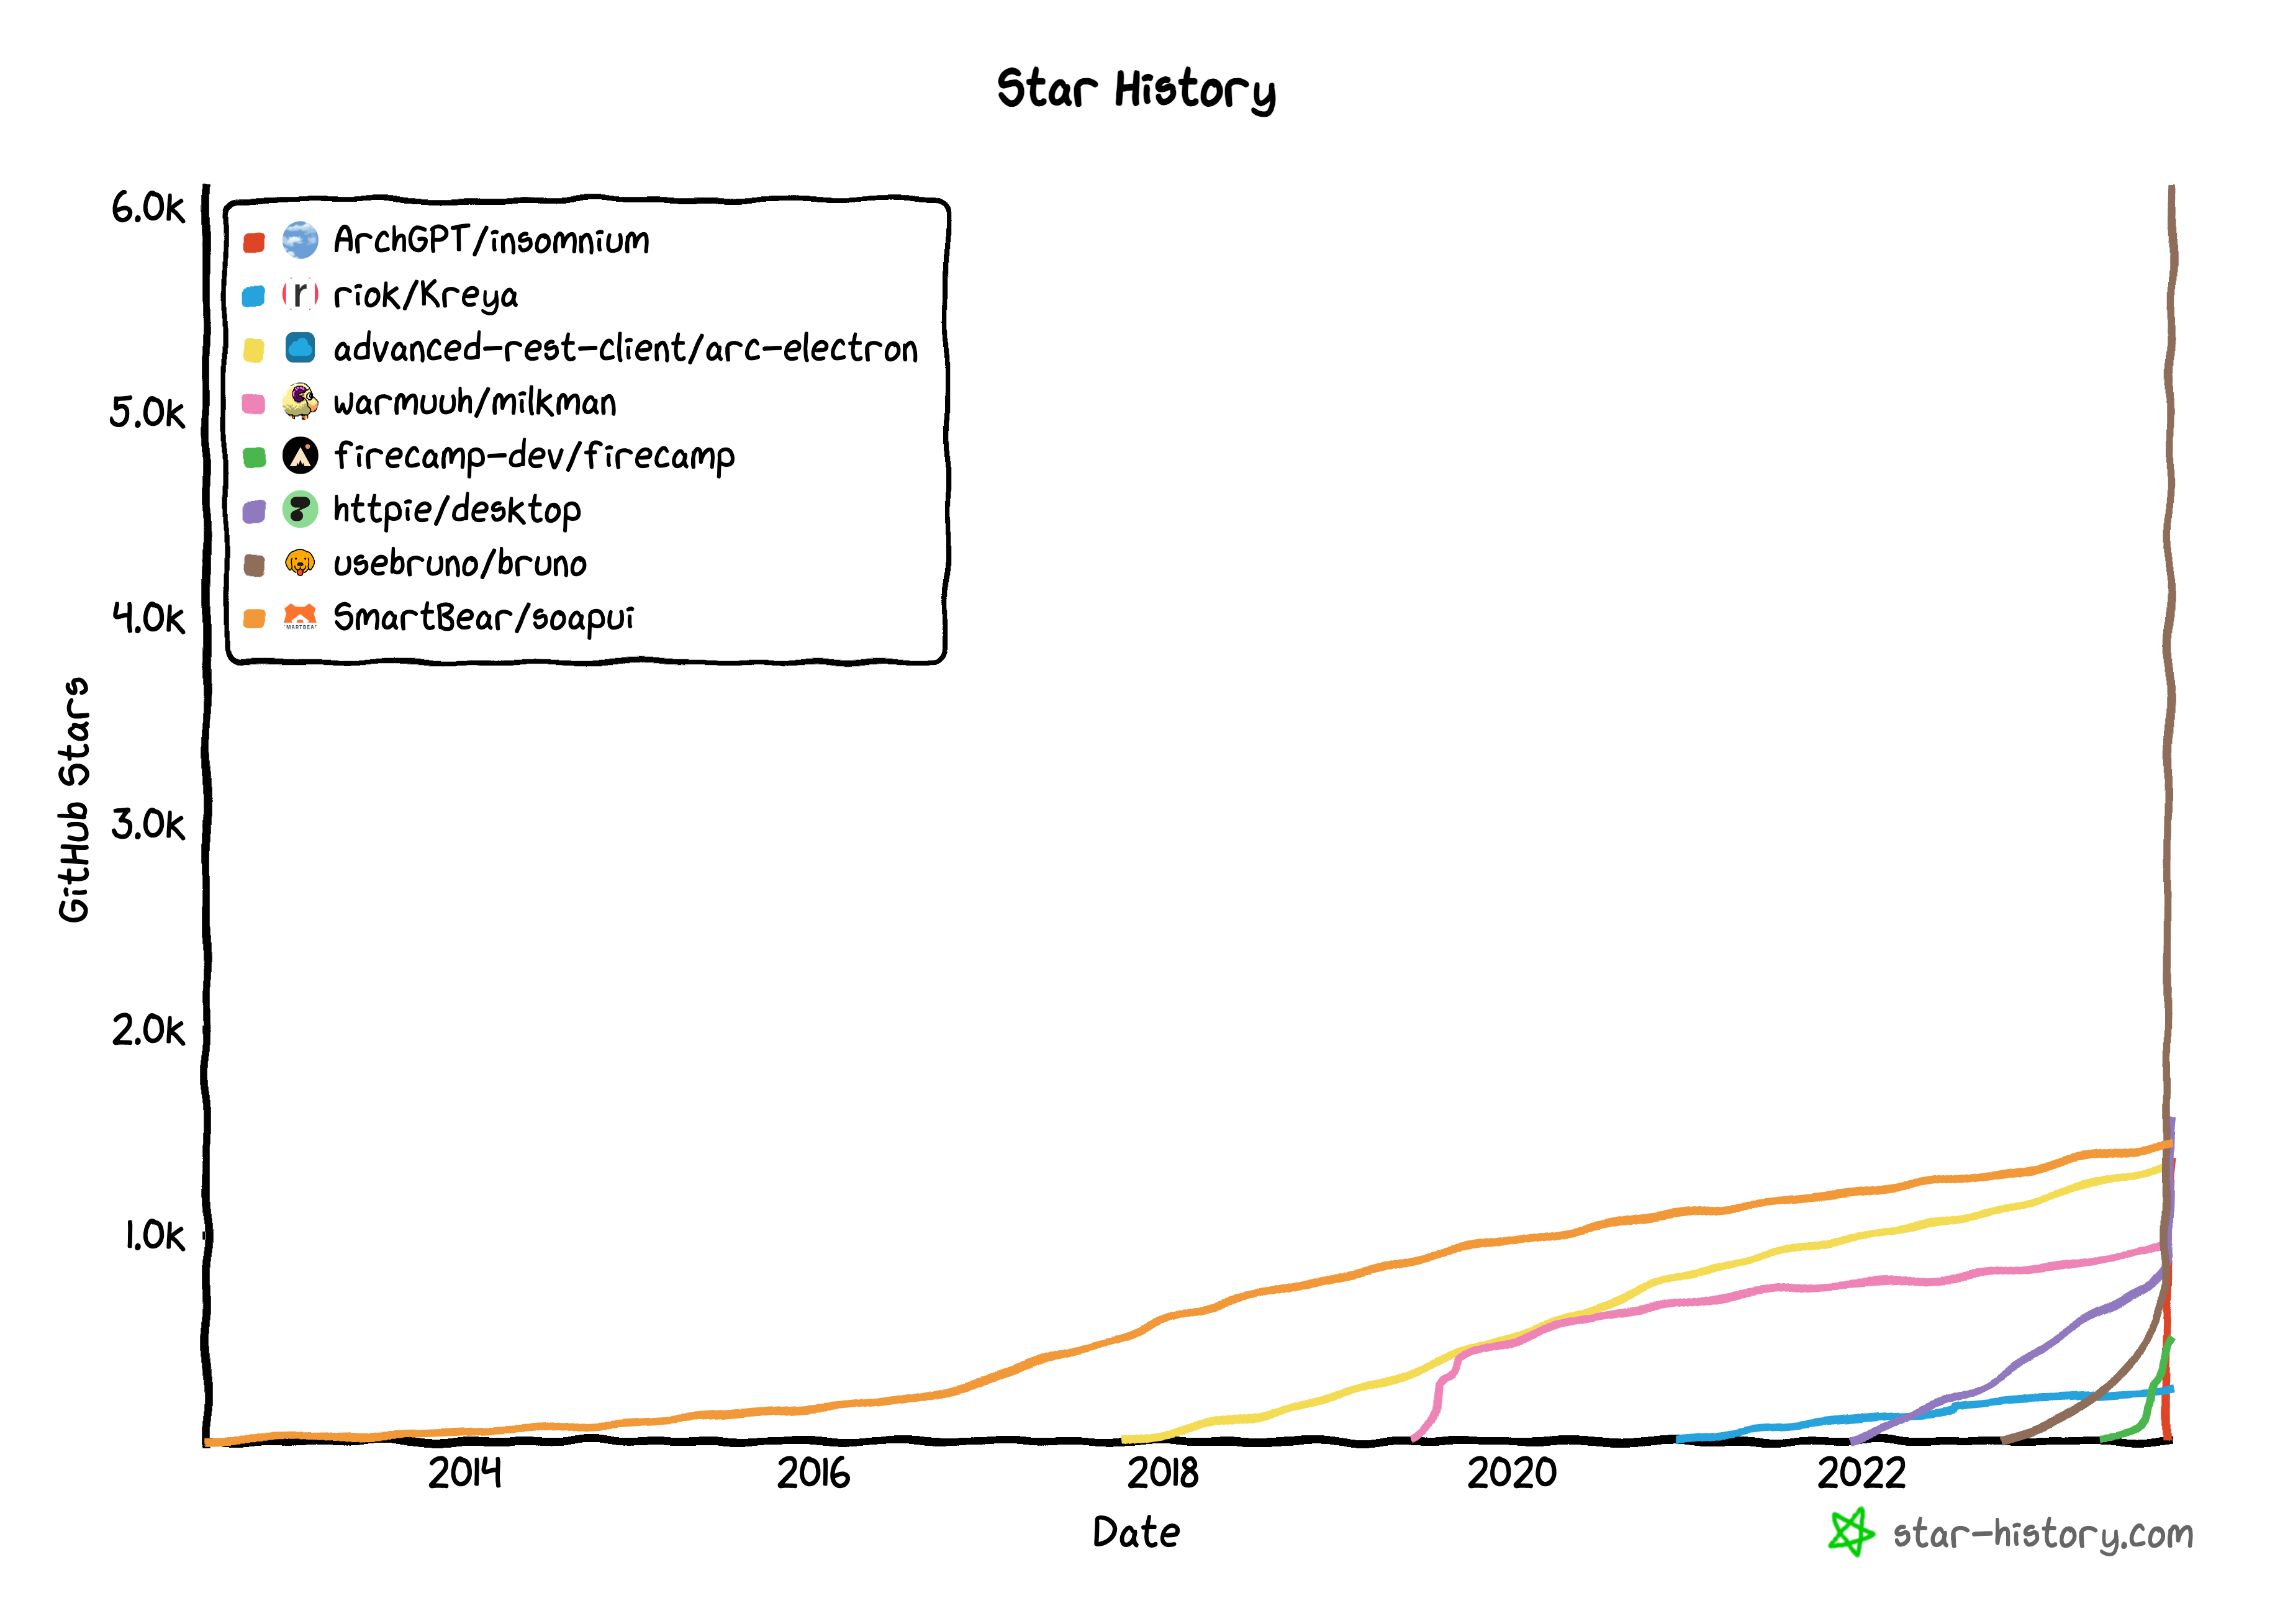 GitHub star history for all projects with lower ratings compared